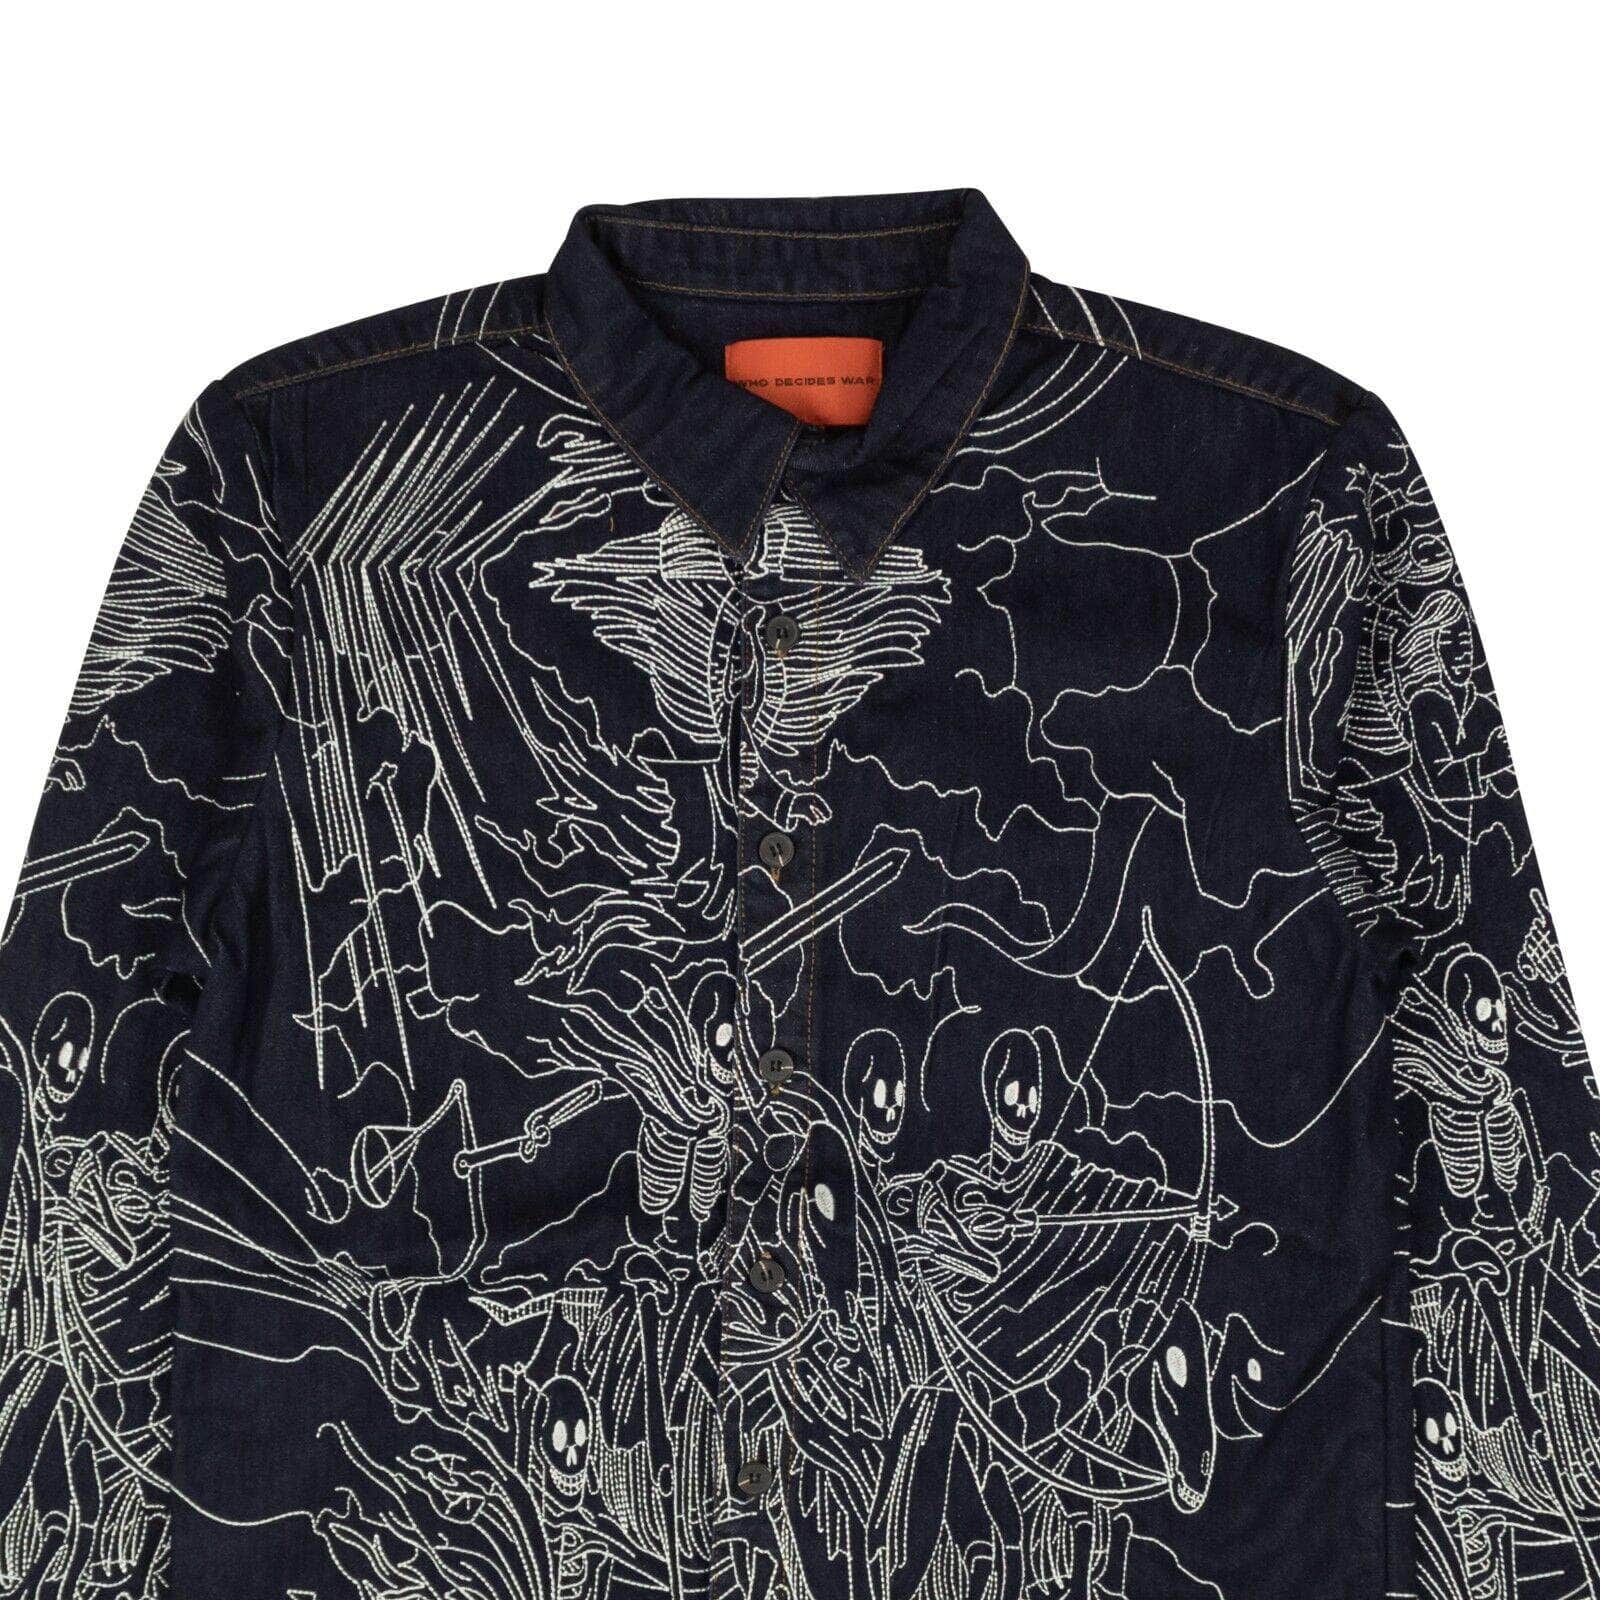 Who Decides War 500-750, channelenable-all, chicmi, couponcollection, gender-mens, main-clothing, mens-shoes, size-l, size-xl, size-xxxl, who-decides-war Denim Embroidered Four Horseman Workshirt